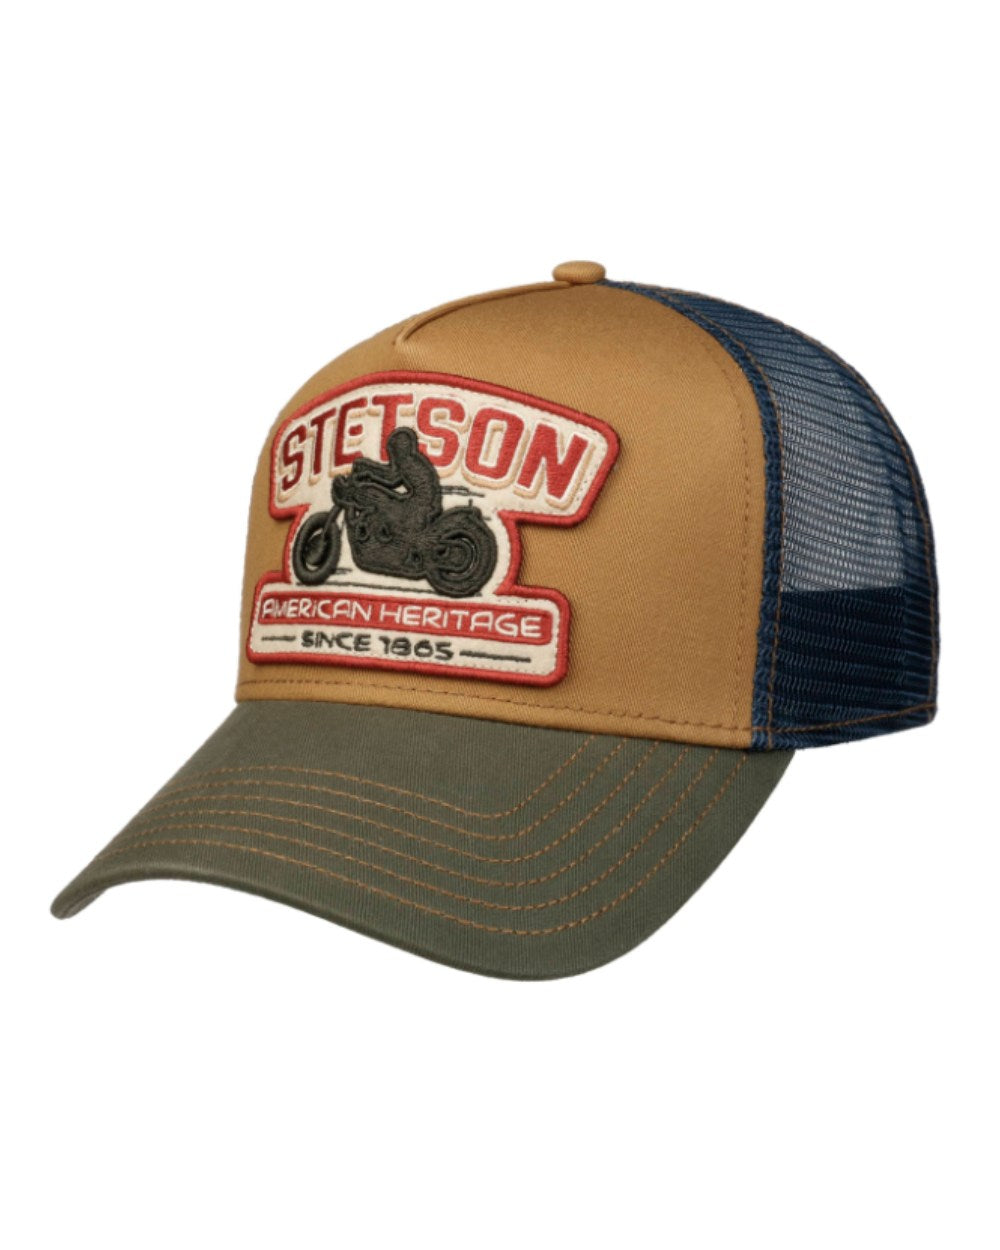 Beige/Olive Stetson Motorcycle Trucker Cap on White background 